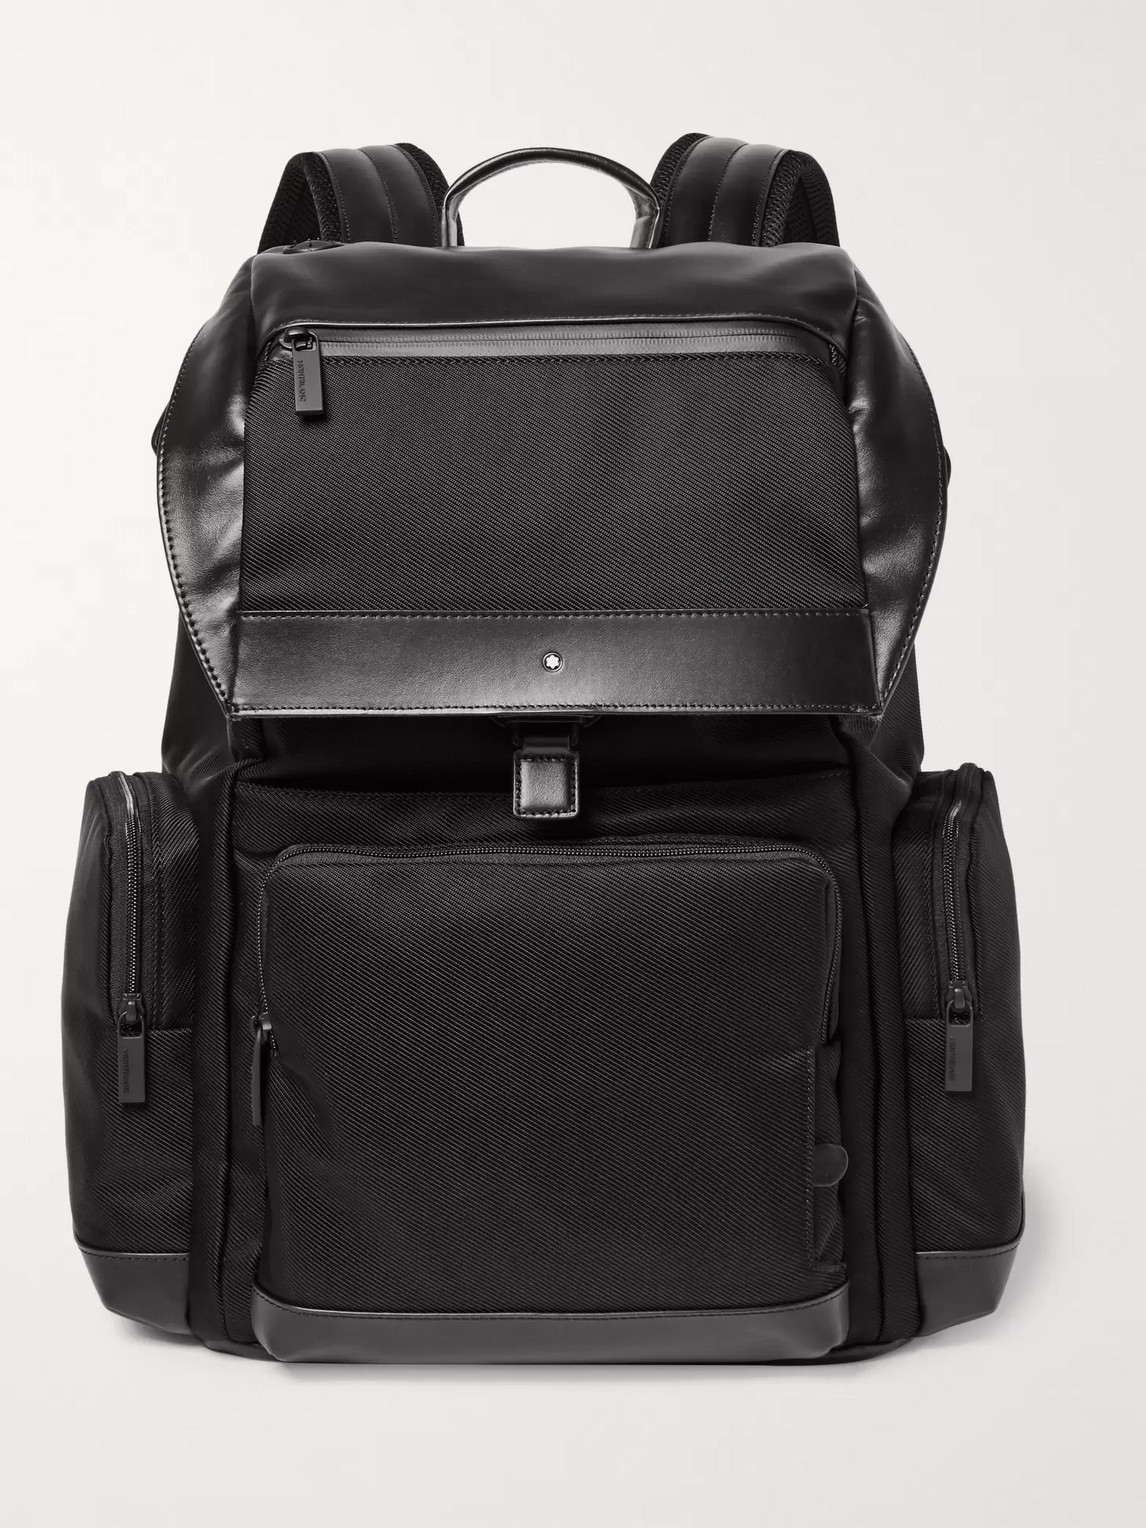 MONTBLANC NIGHTFLIGHT LEATHER-TRIMMED CANVAS BACKPACK